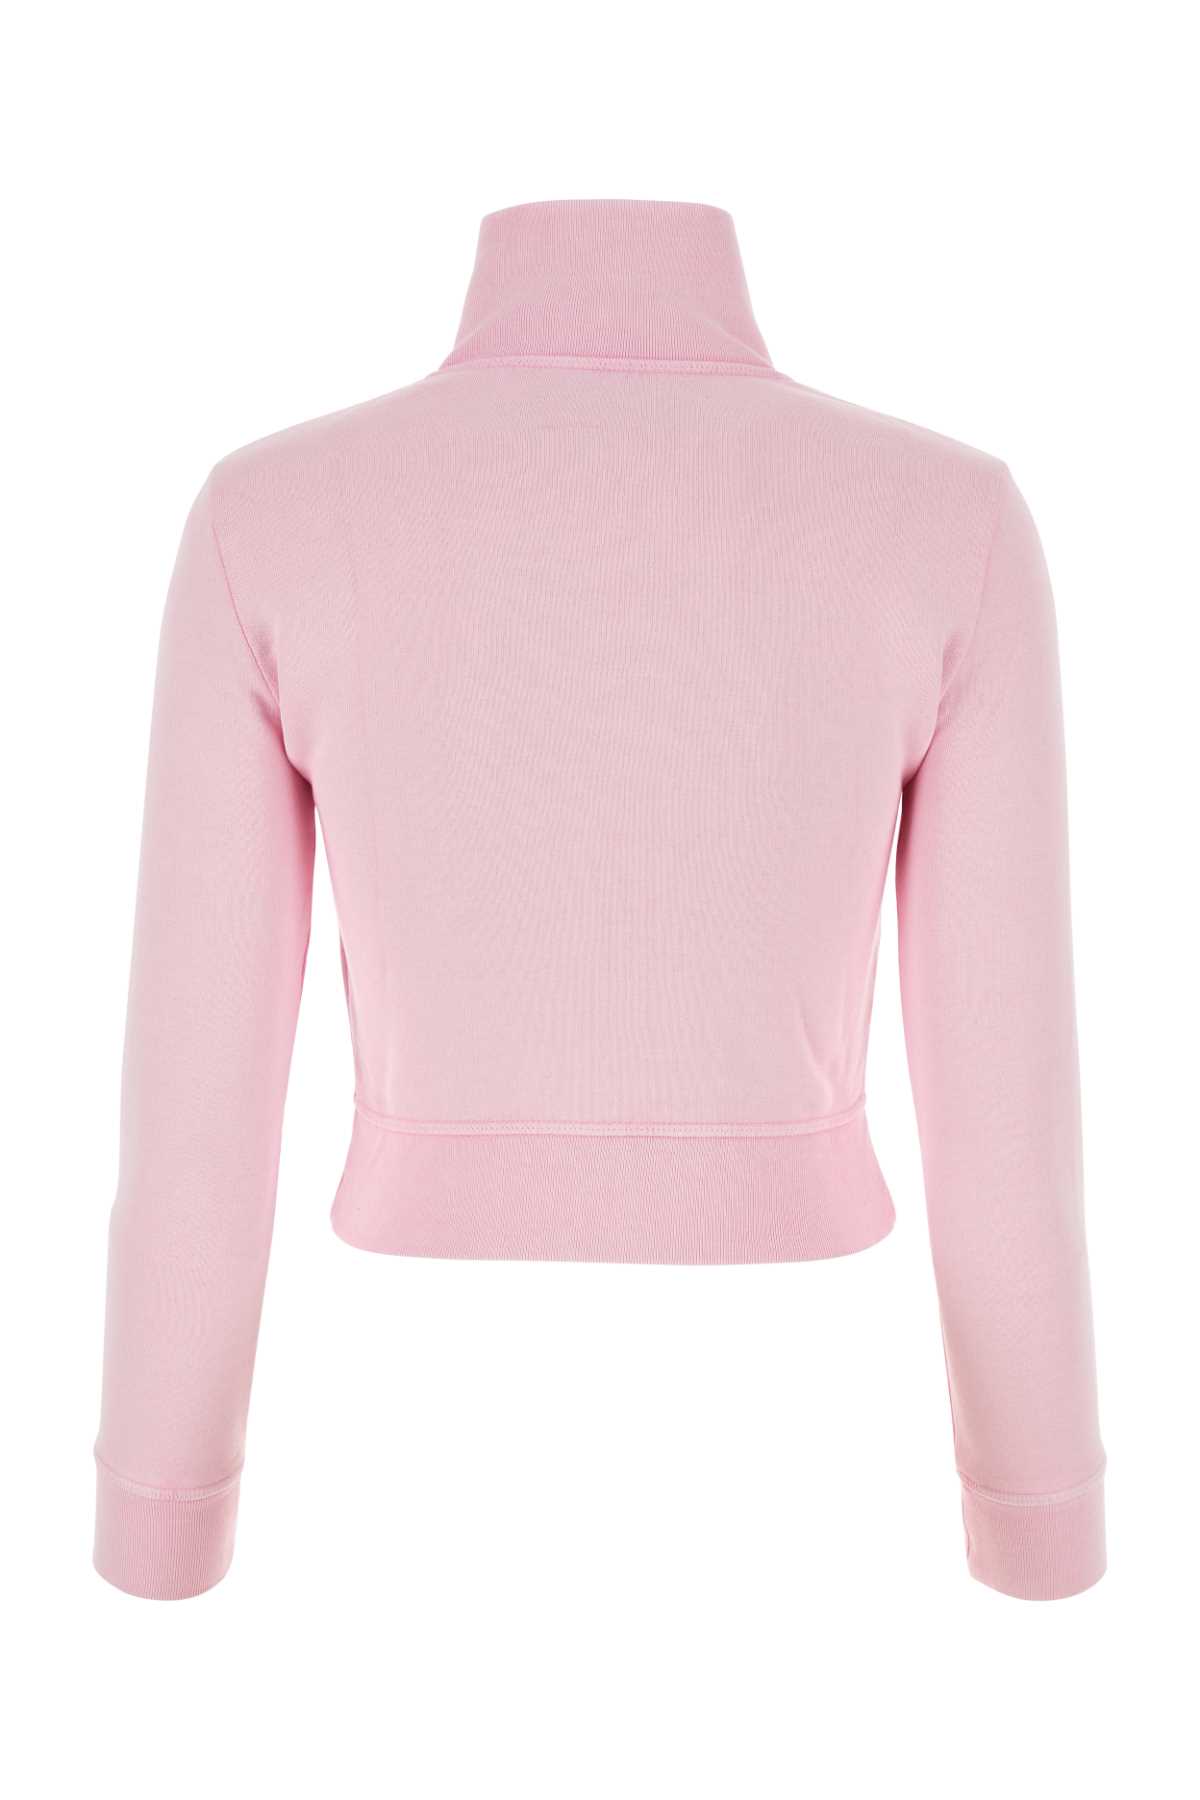 Dsquared2 Pink Cotton Sweatshirt In Lilac